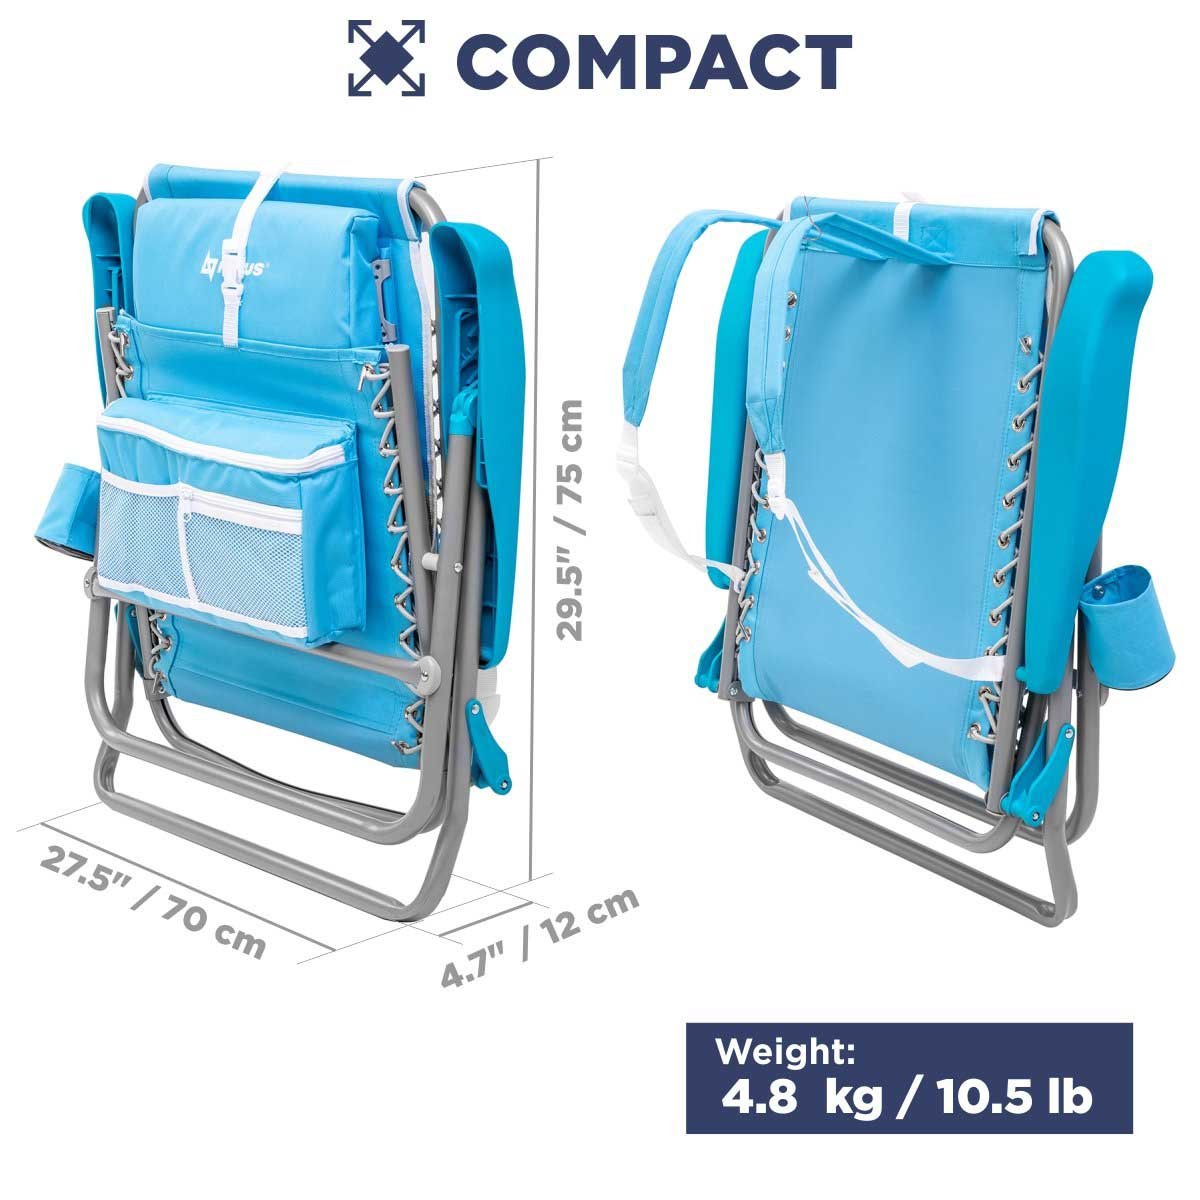 Premium Backpack Beach Chair with Cooler Bag and Headrest, Blue could be easily carried as a backpack thanks to adjustable shoulder straps. It is only 27.5 inches wide. 29.5 inches long and 4.7 inches thick when folded 